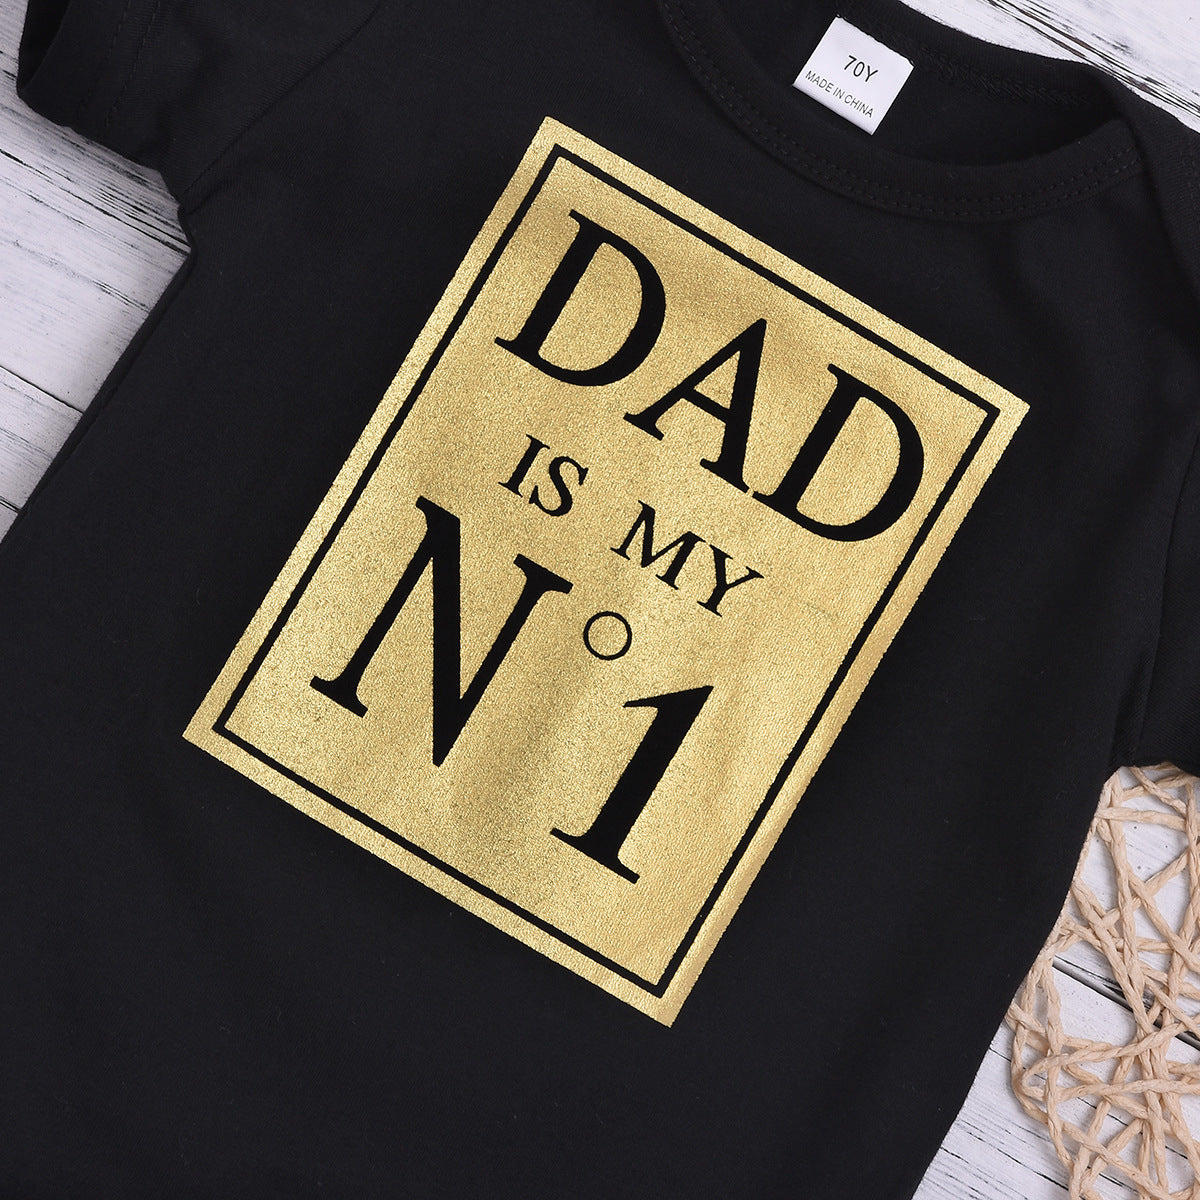 Gender-neutral Baby “DAD's NO.1” Jumpsuit Short Sleeve Casual Black Clothing